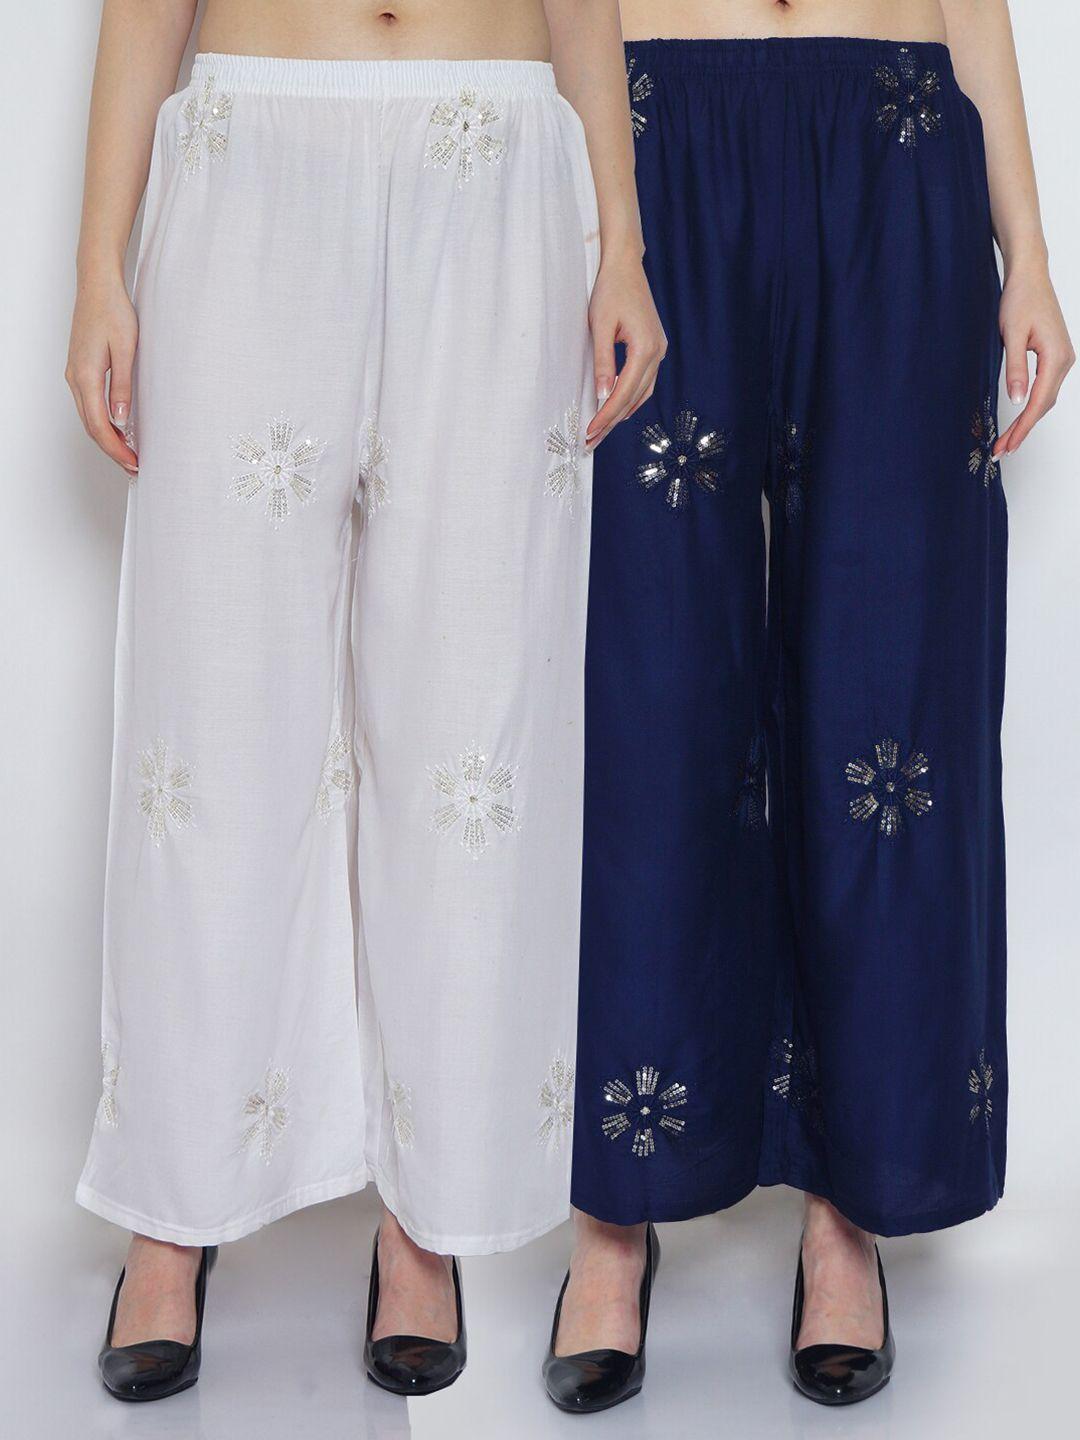 jinfo women pack of 2 white & navy blue floral embroidered flared ethnic palazzos